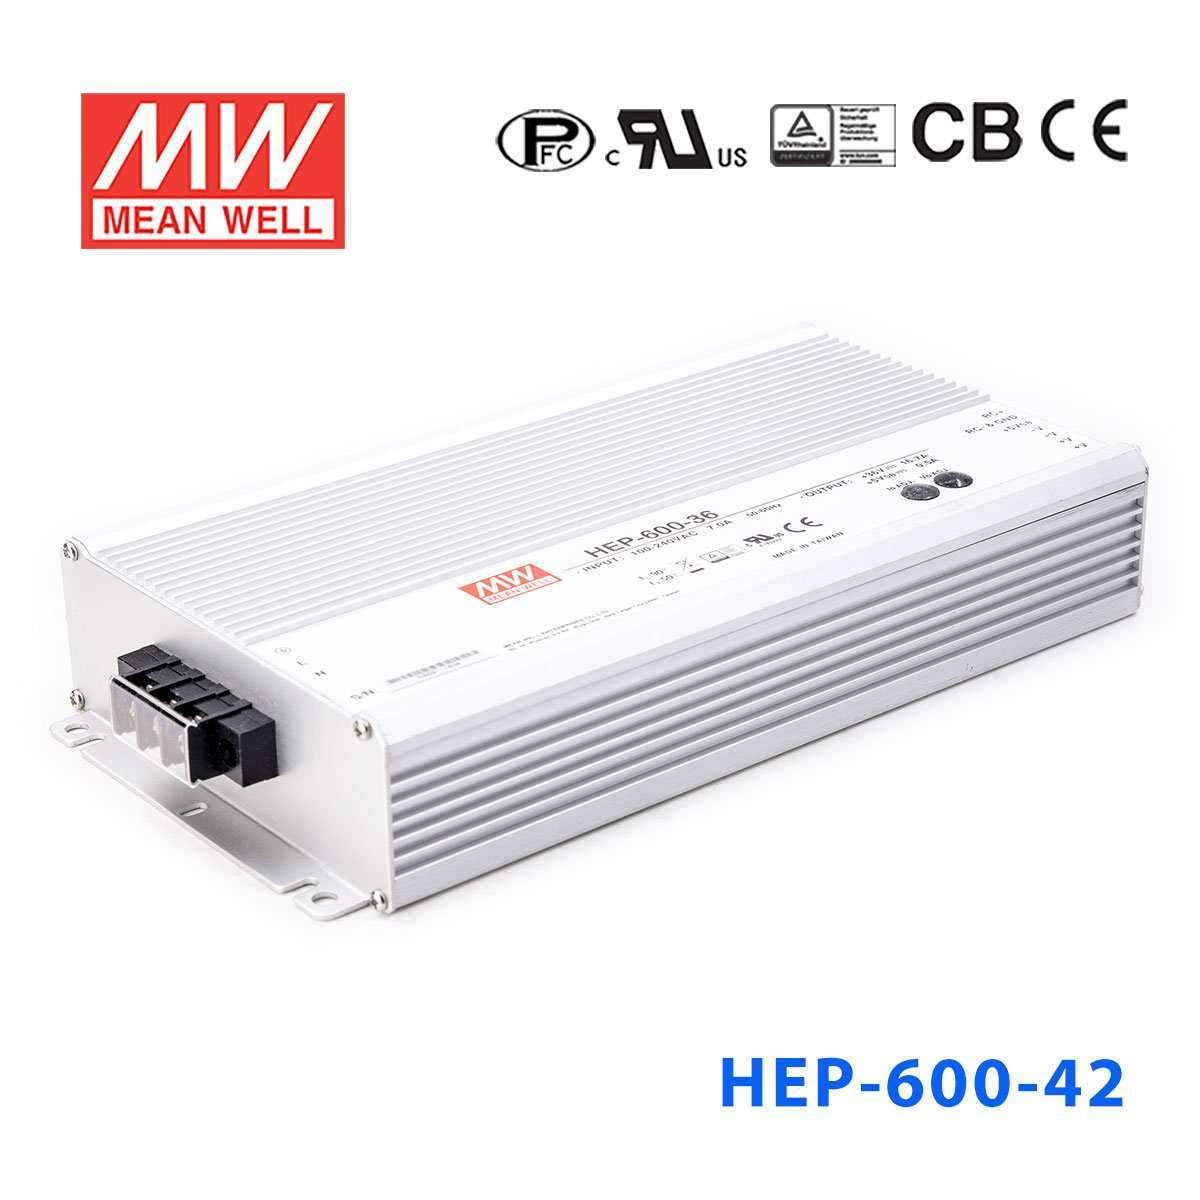 Mean Well HEP-600-42 Power Supply 600.6W 42V